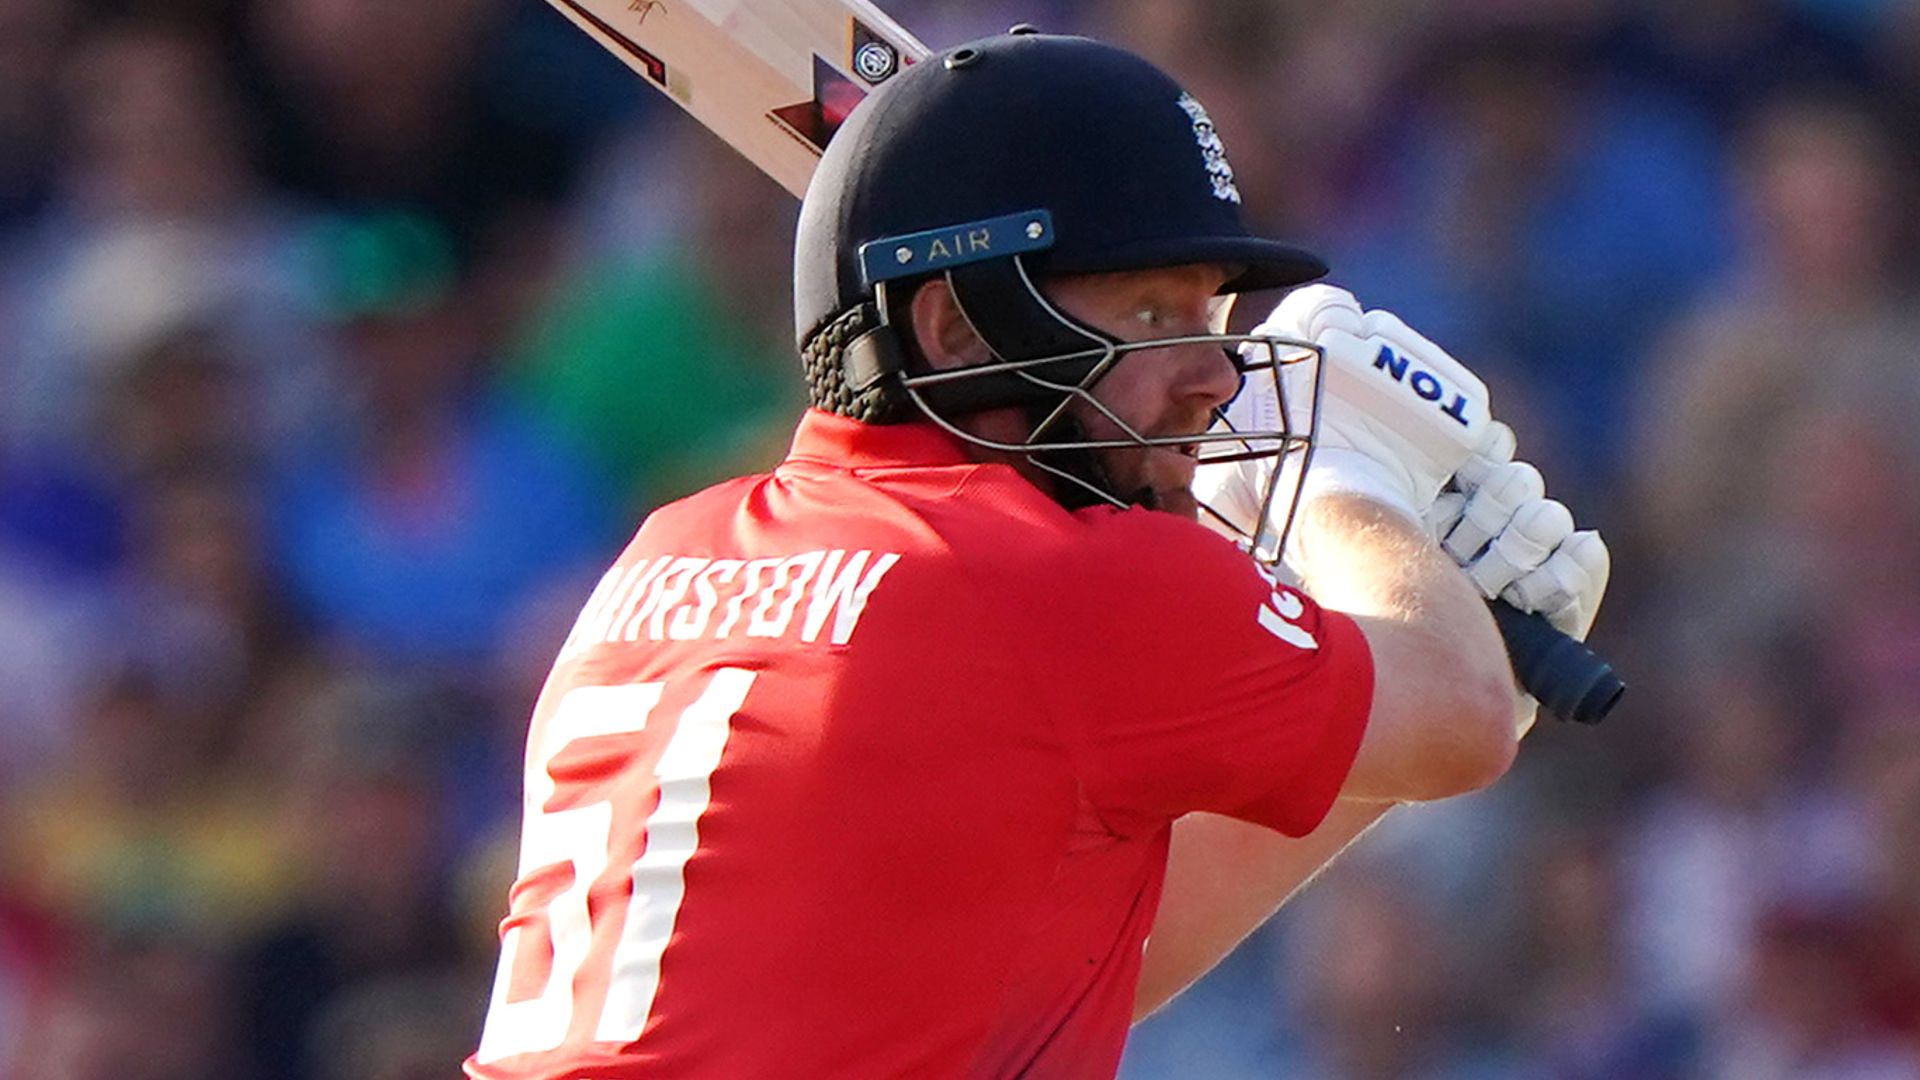 Bairstow gets England off to great start with six sixes!